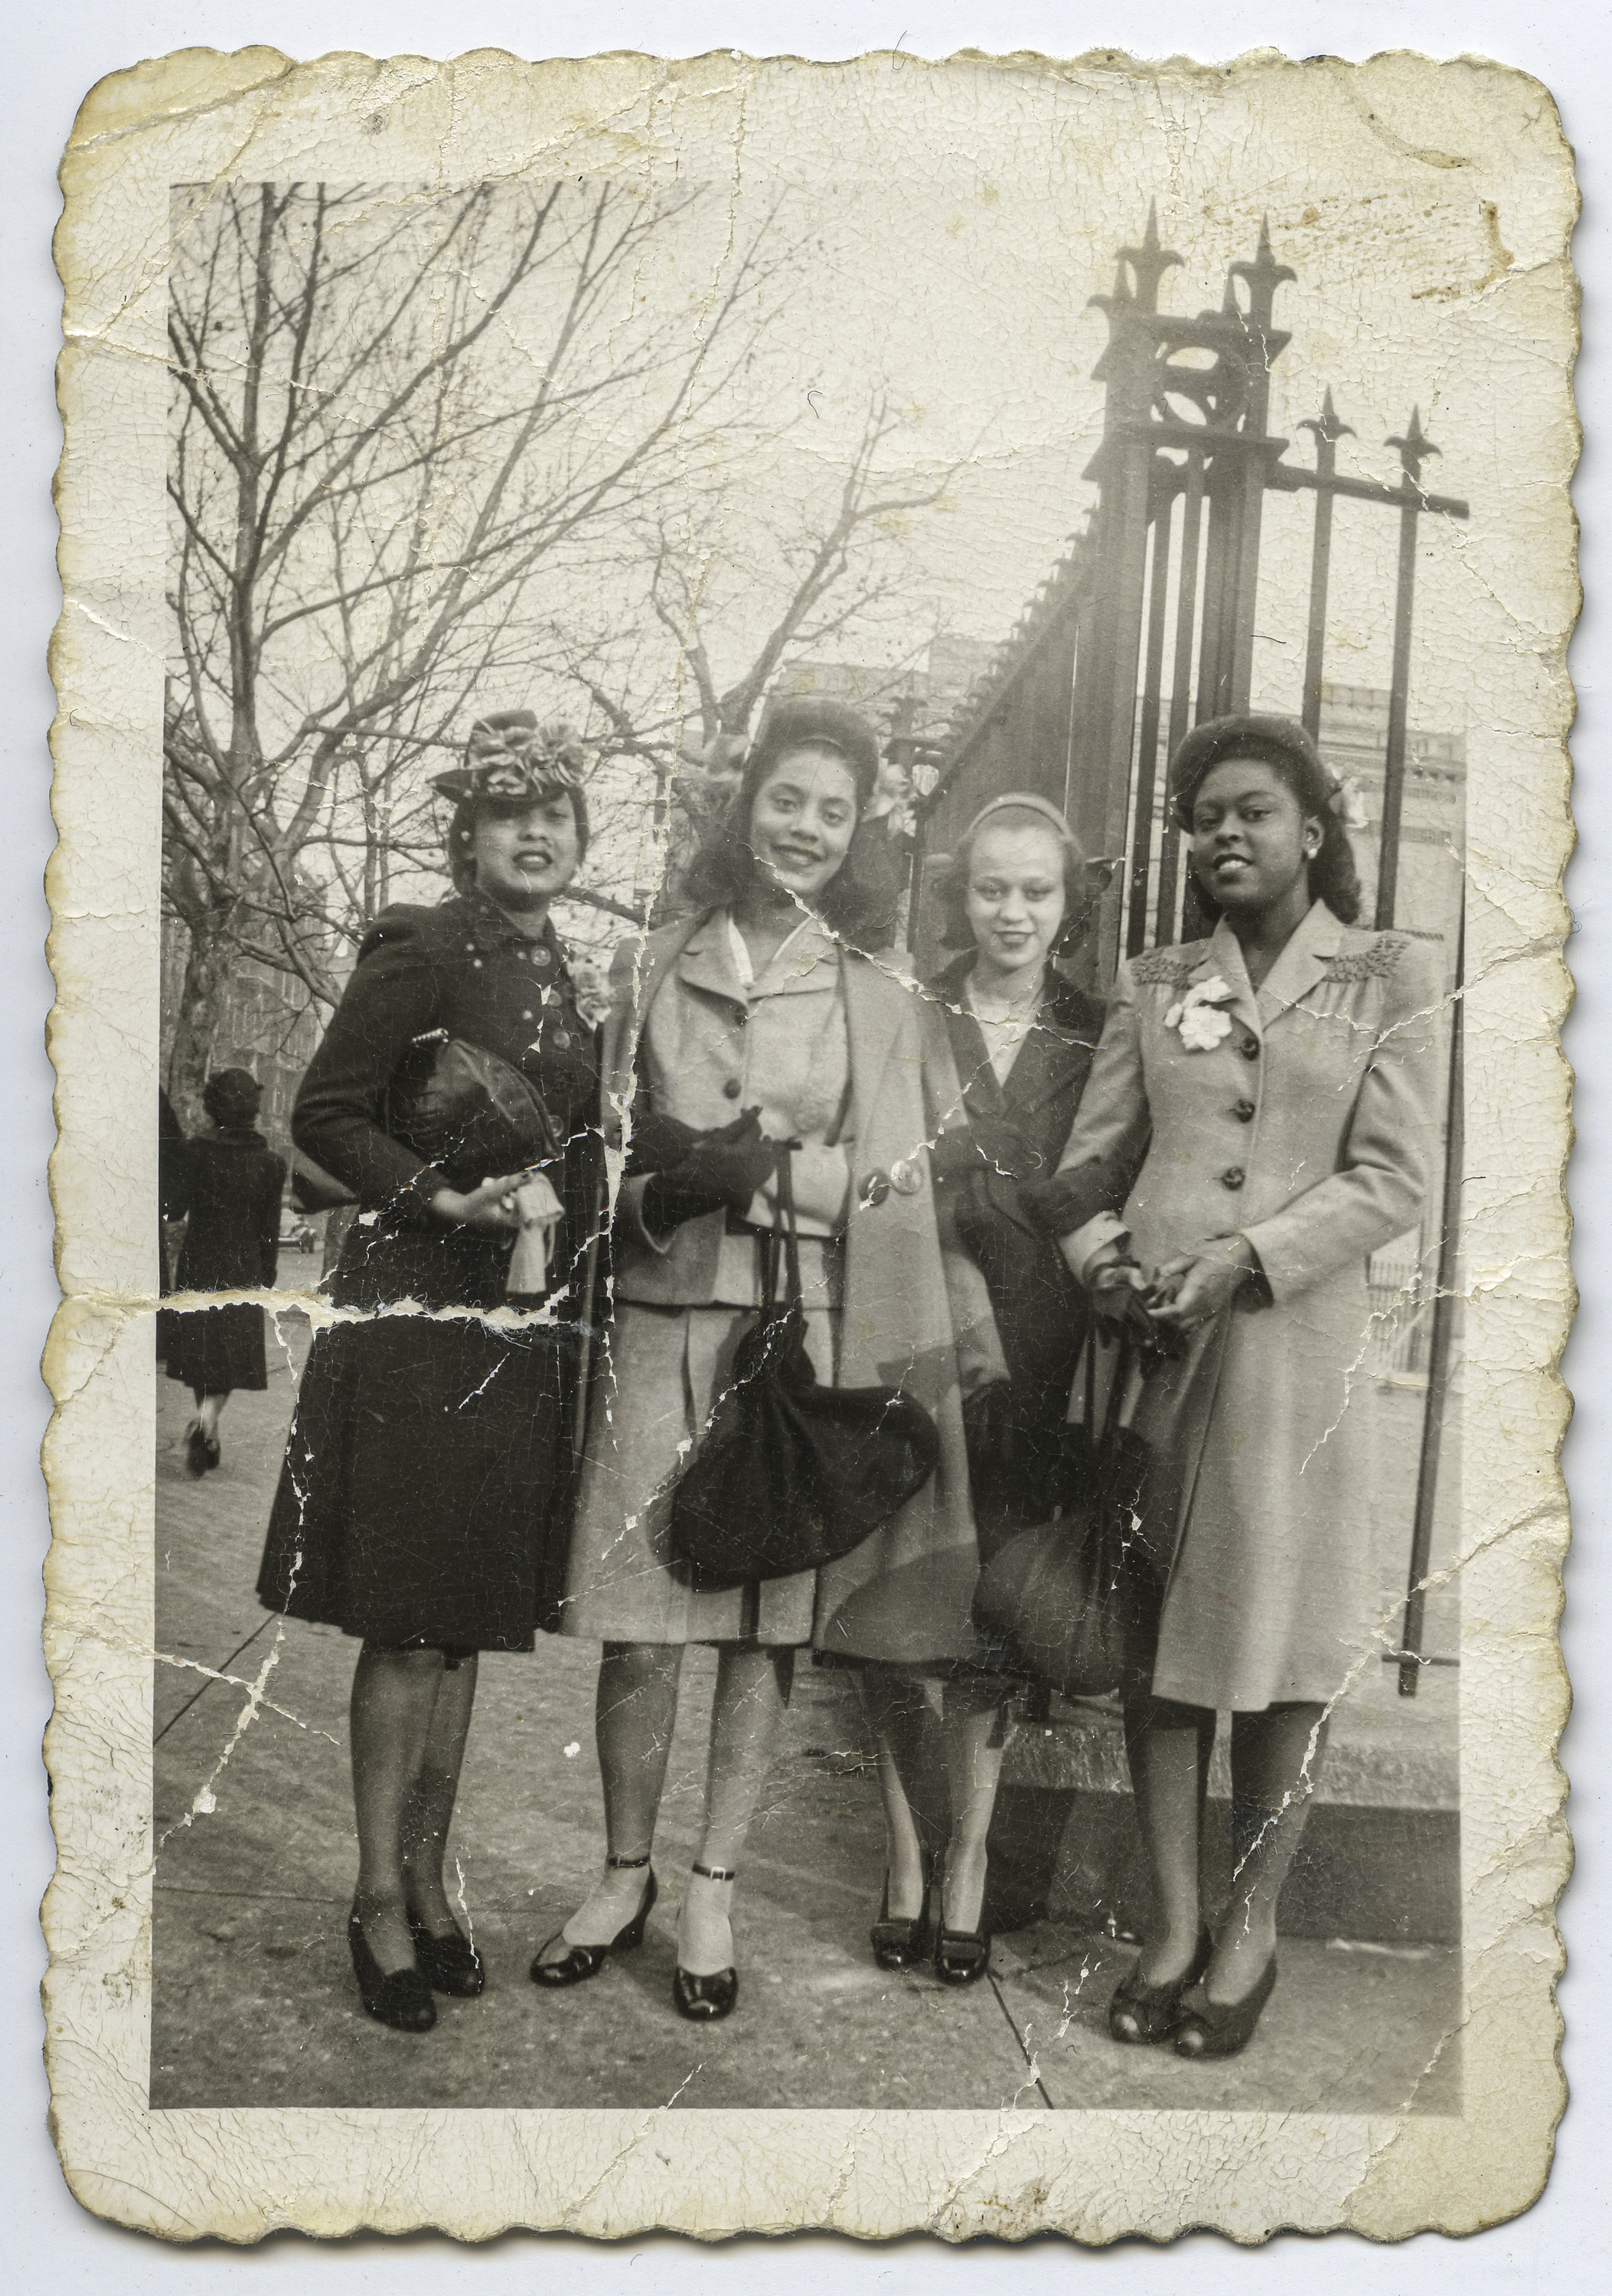 Carmen (left) with Gloria, Glenna Rohan, and another friend during Easter, 1940s.